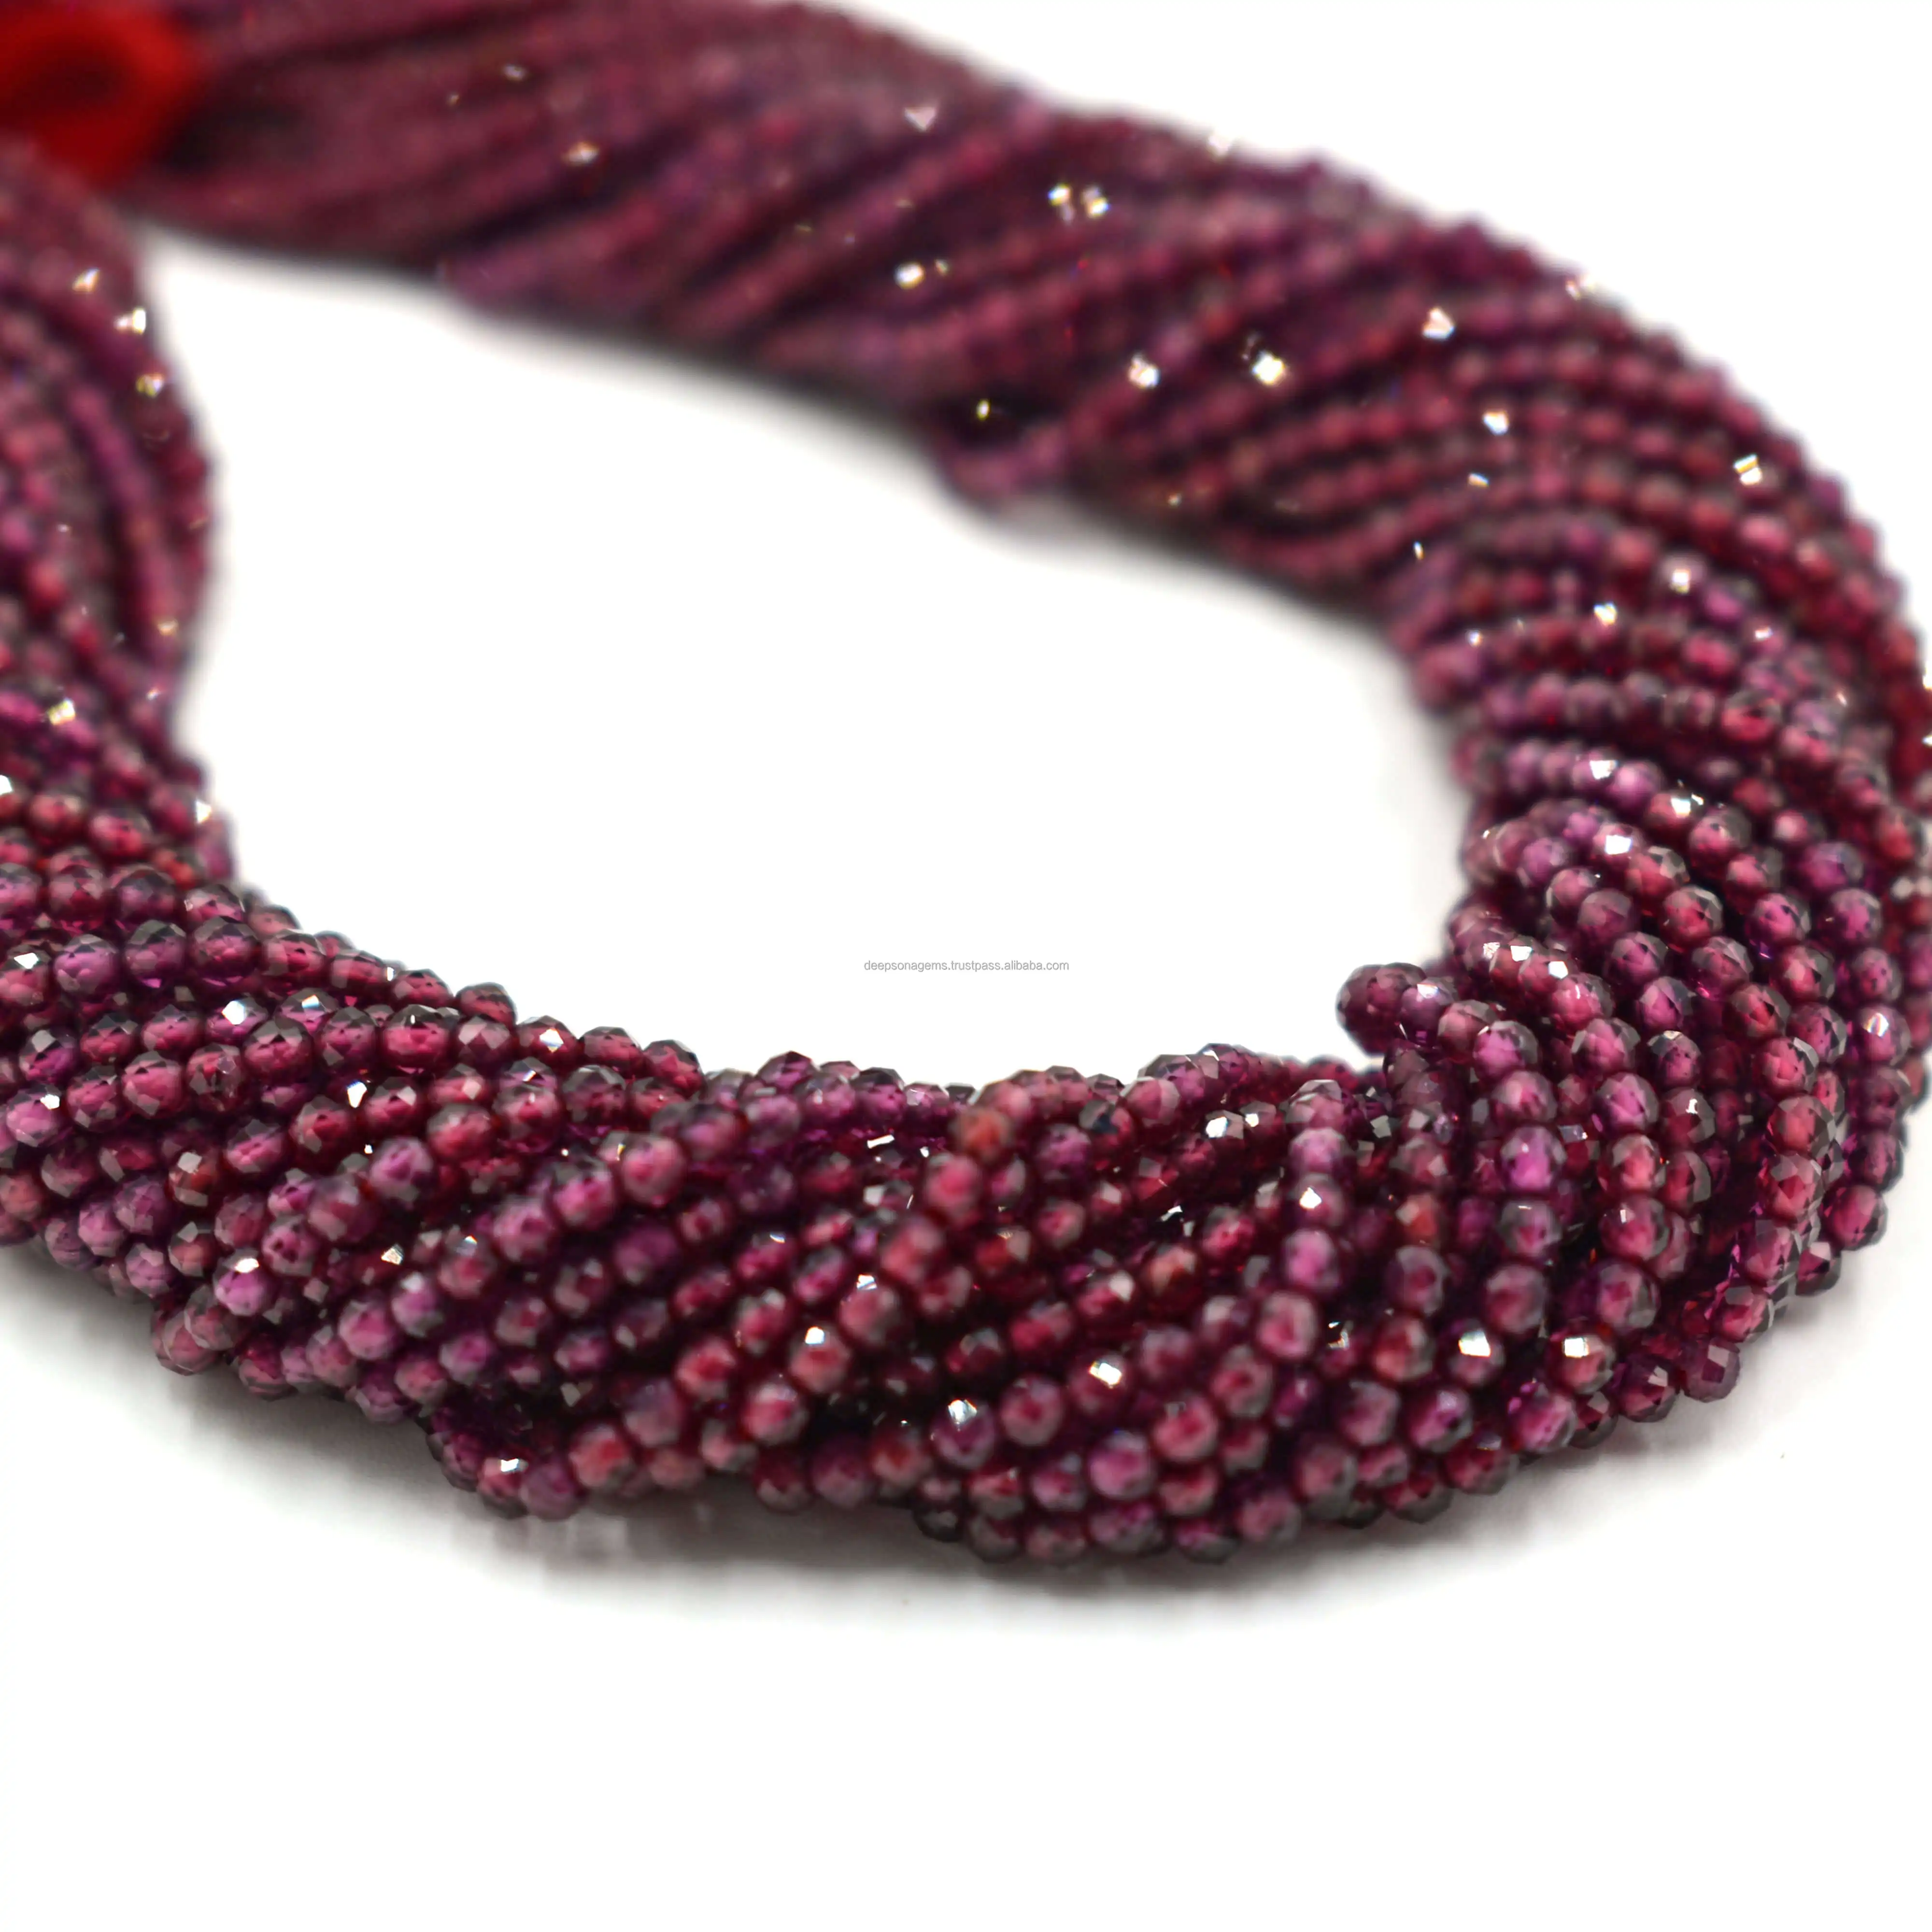 Natural 2 mm Stone Beads, Pink Garnet Faceted Round Gemstone Strand For DIY Necklace, High Quality Gemstone Bead